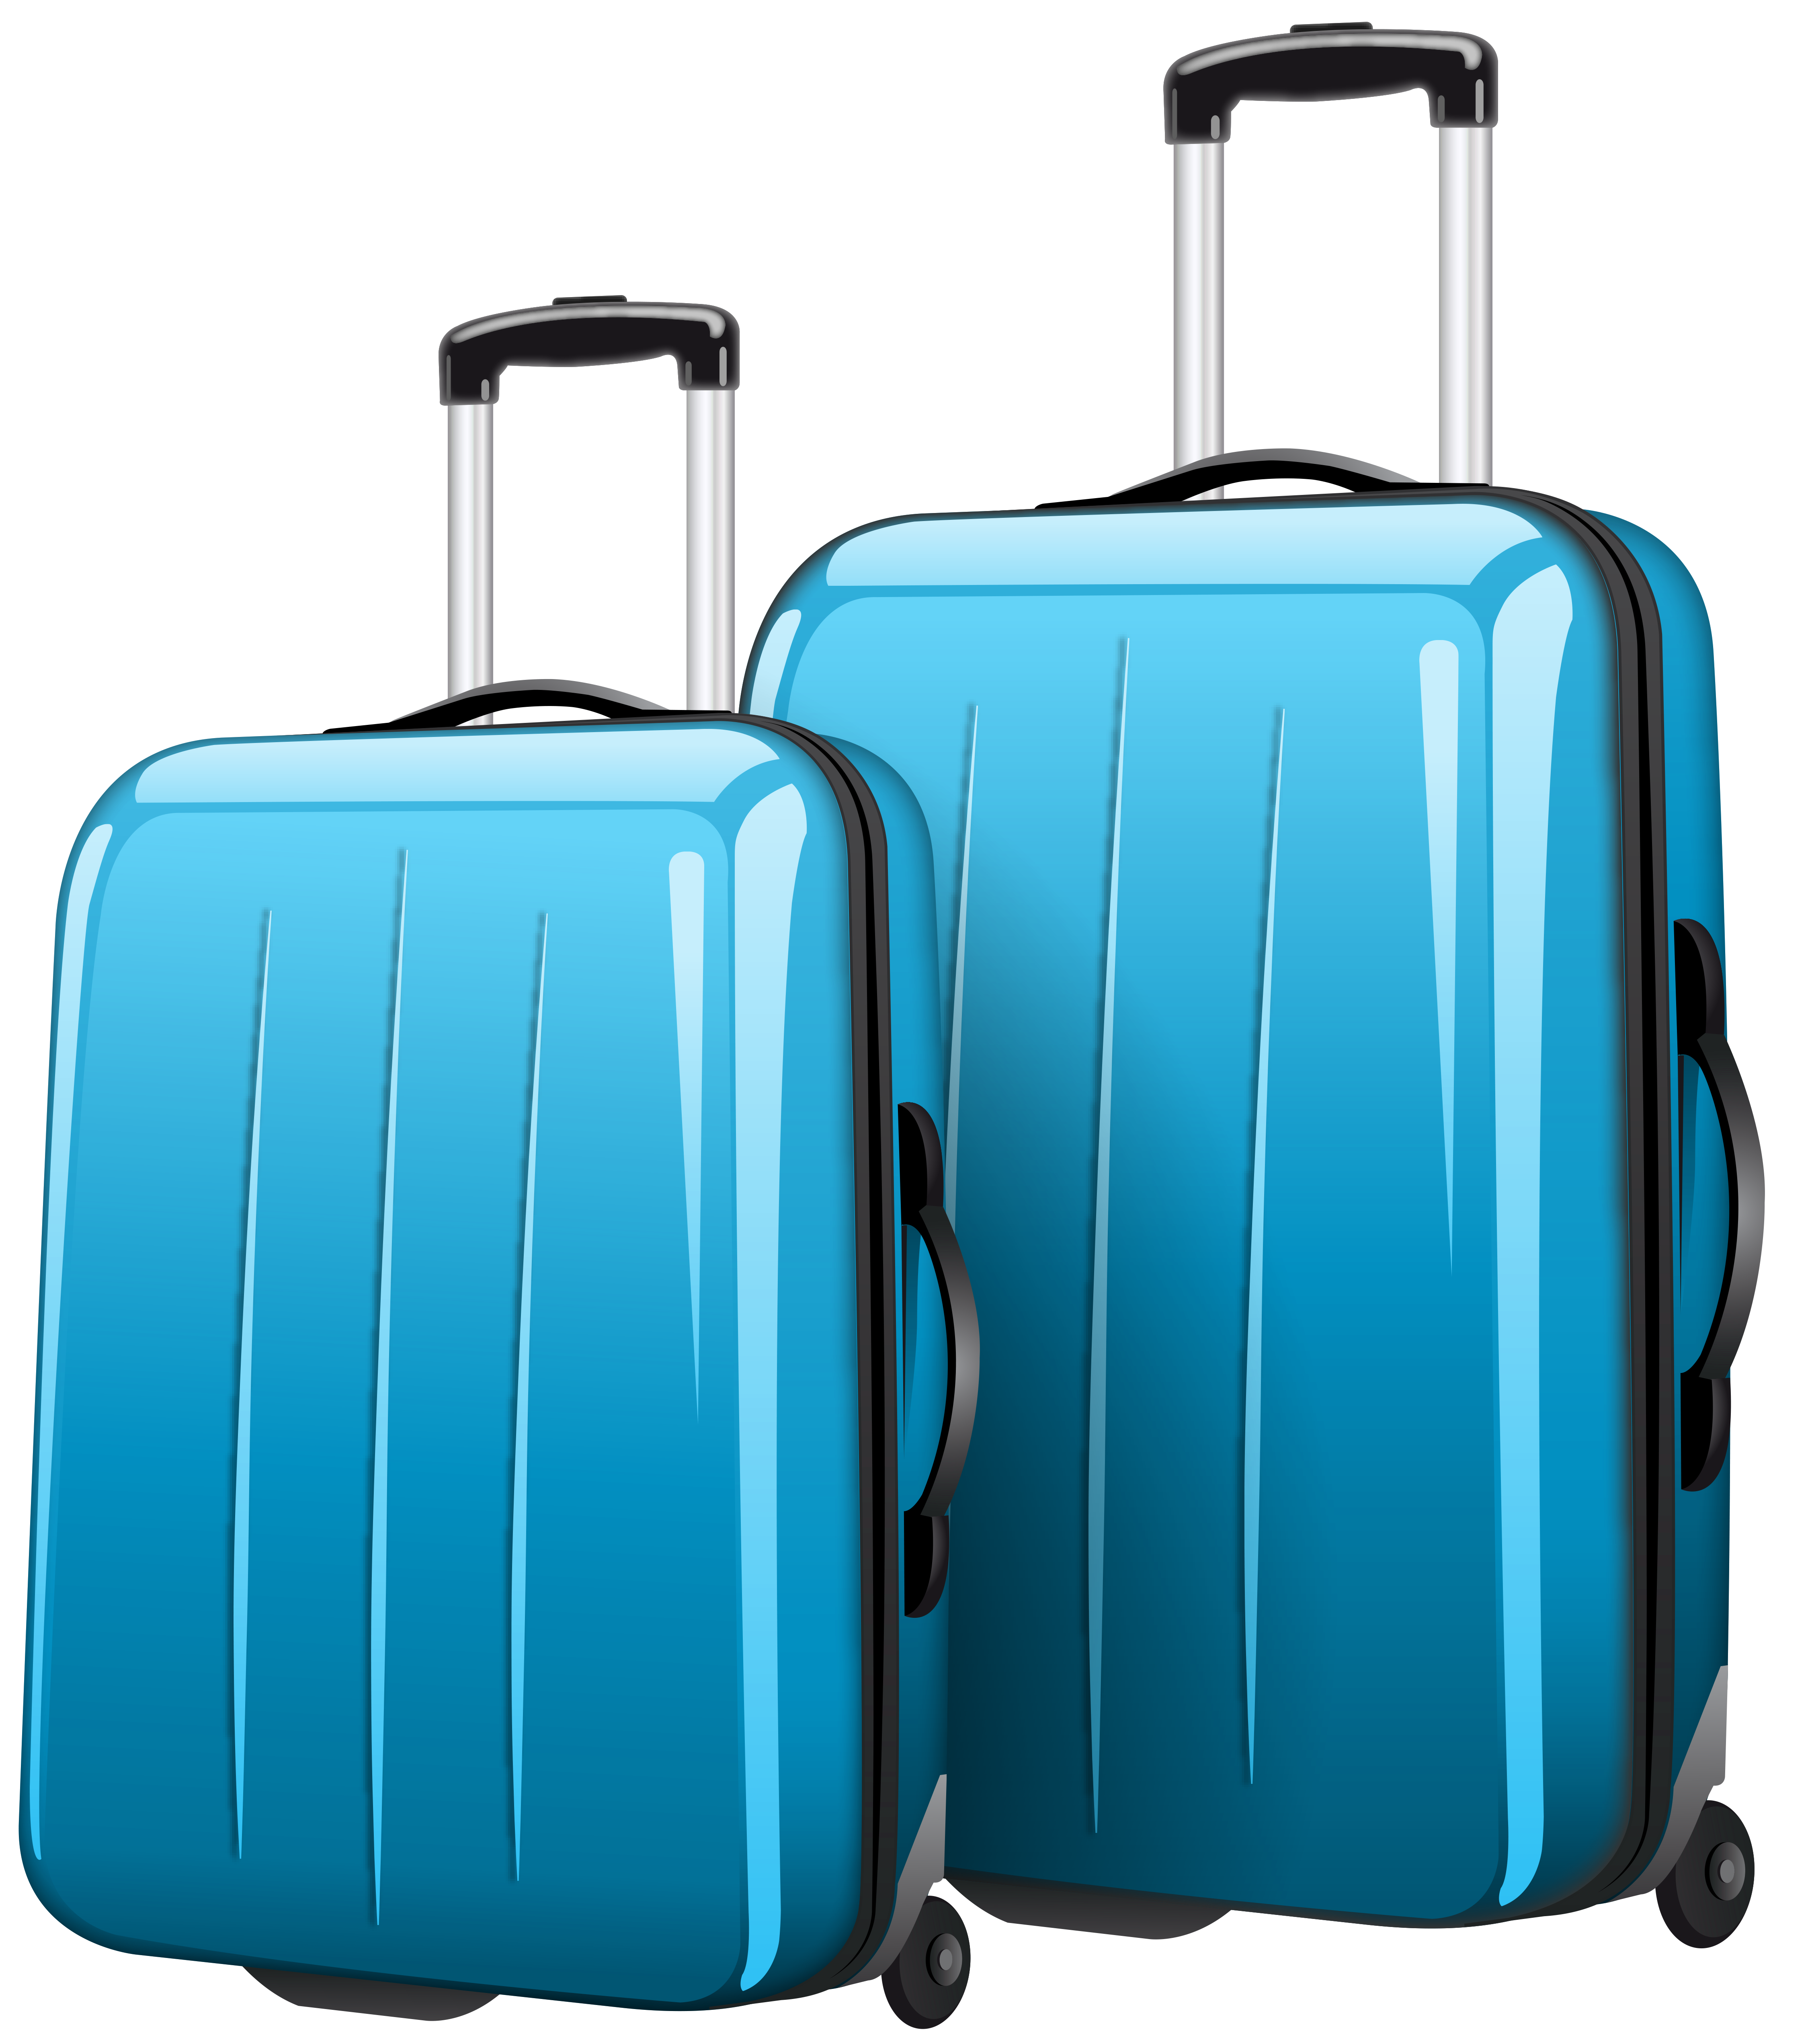 Two Blue Travel Bags PNG Clipart Picture.